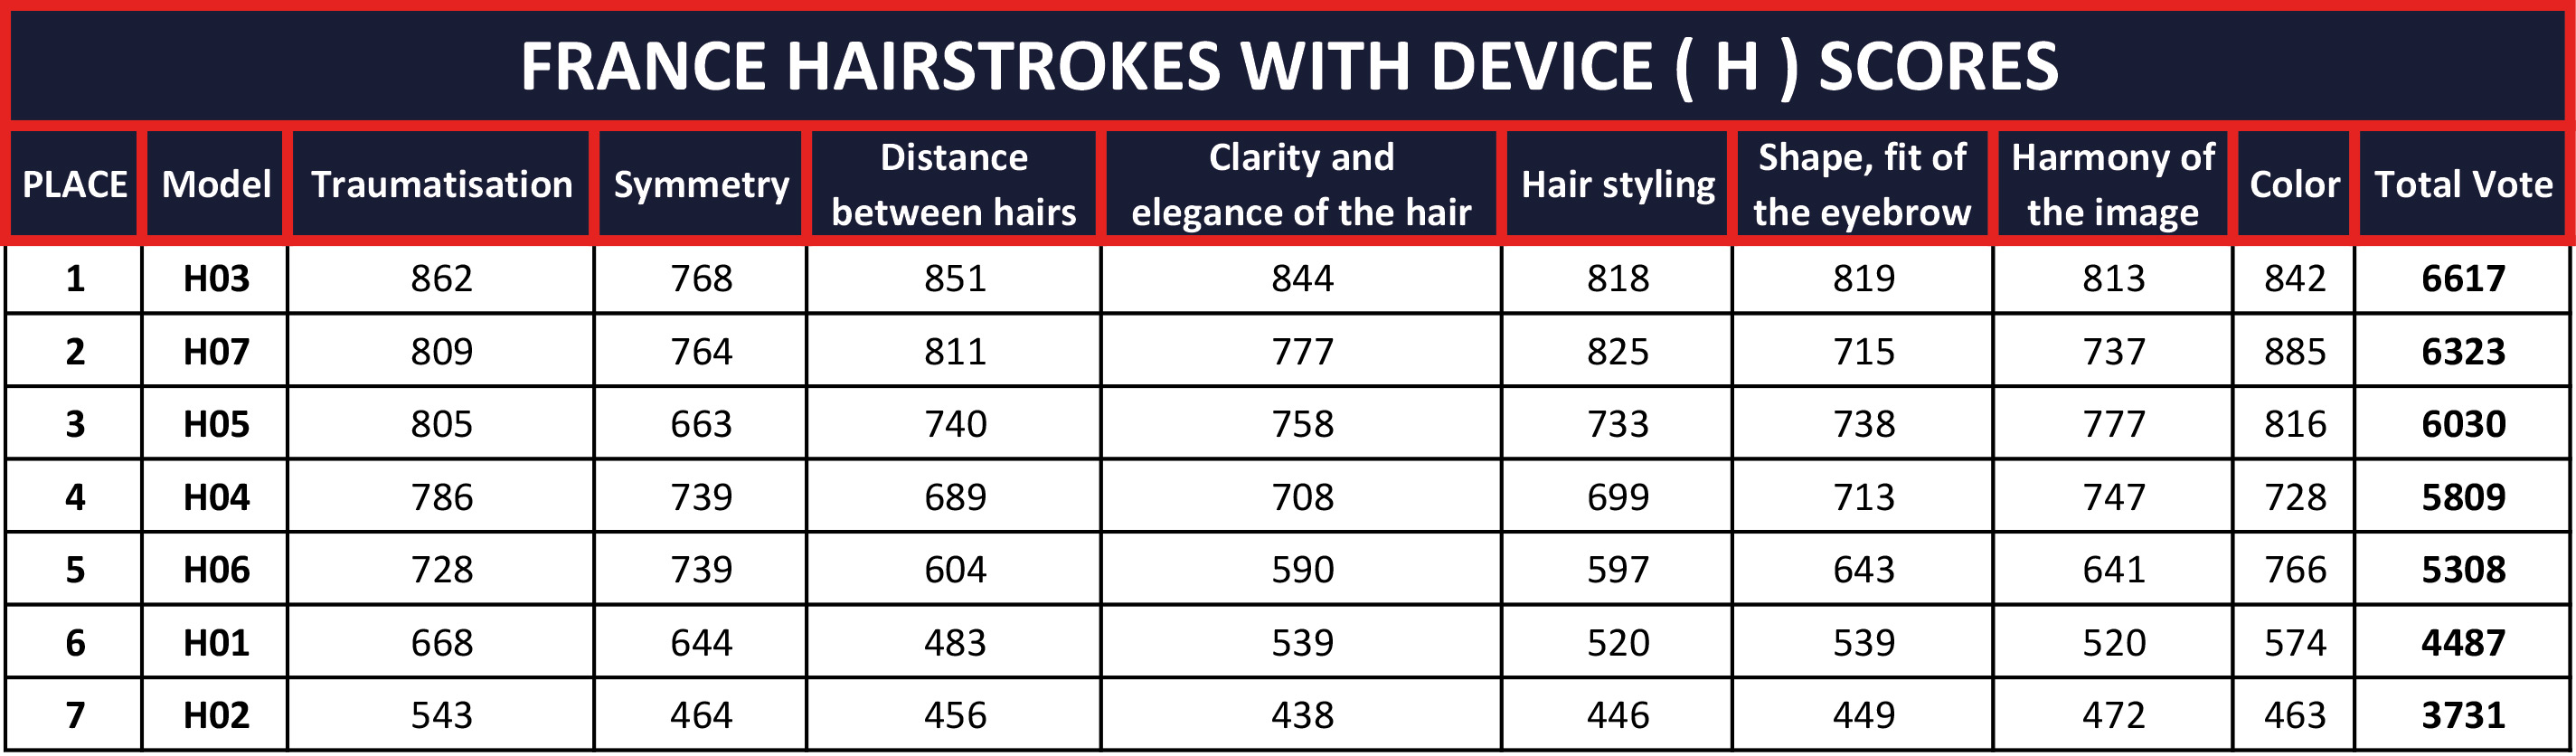 FRANCE-HAIRSTROKES-WITH-DEVICE-(-H-)-SCORES